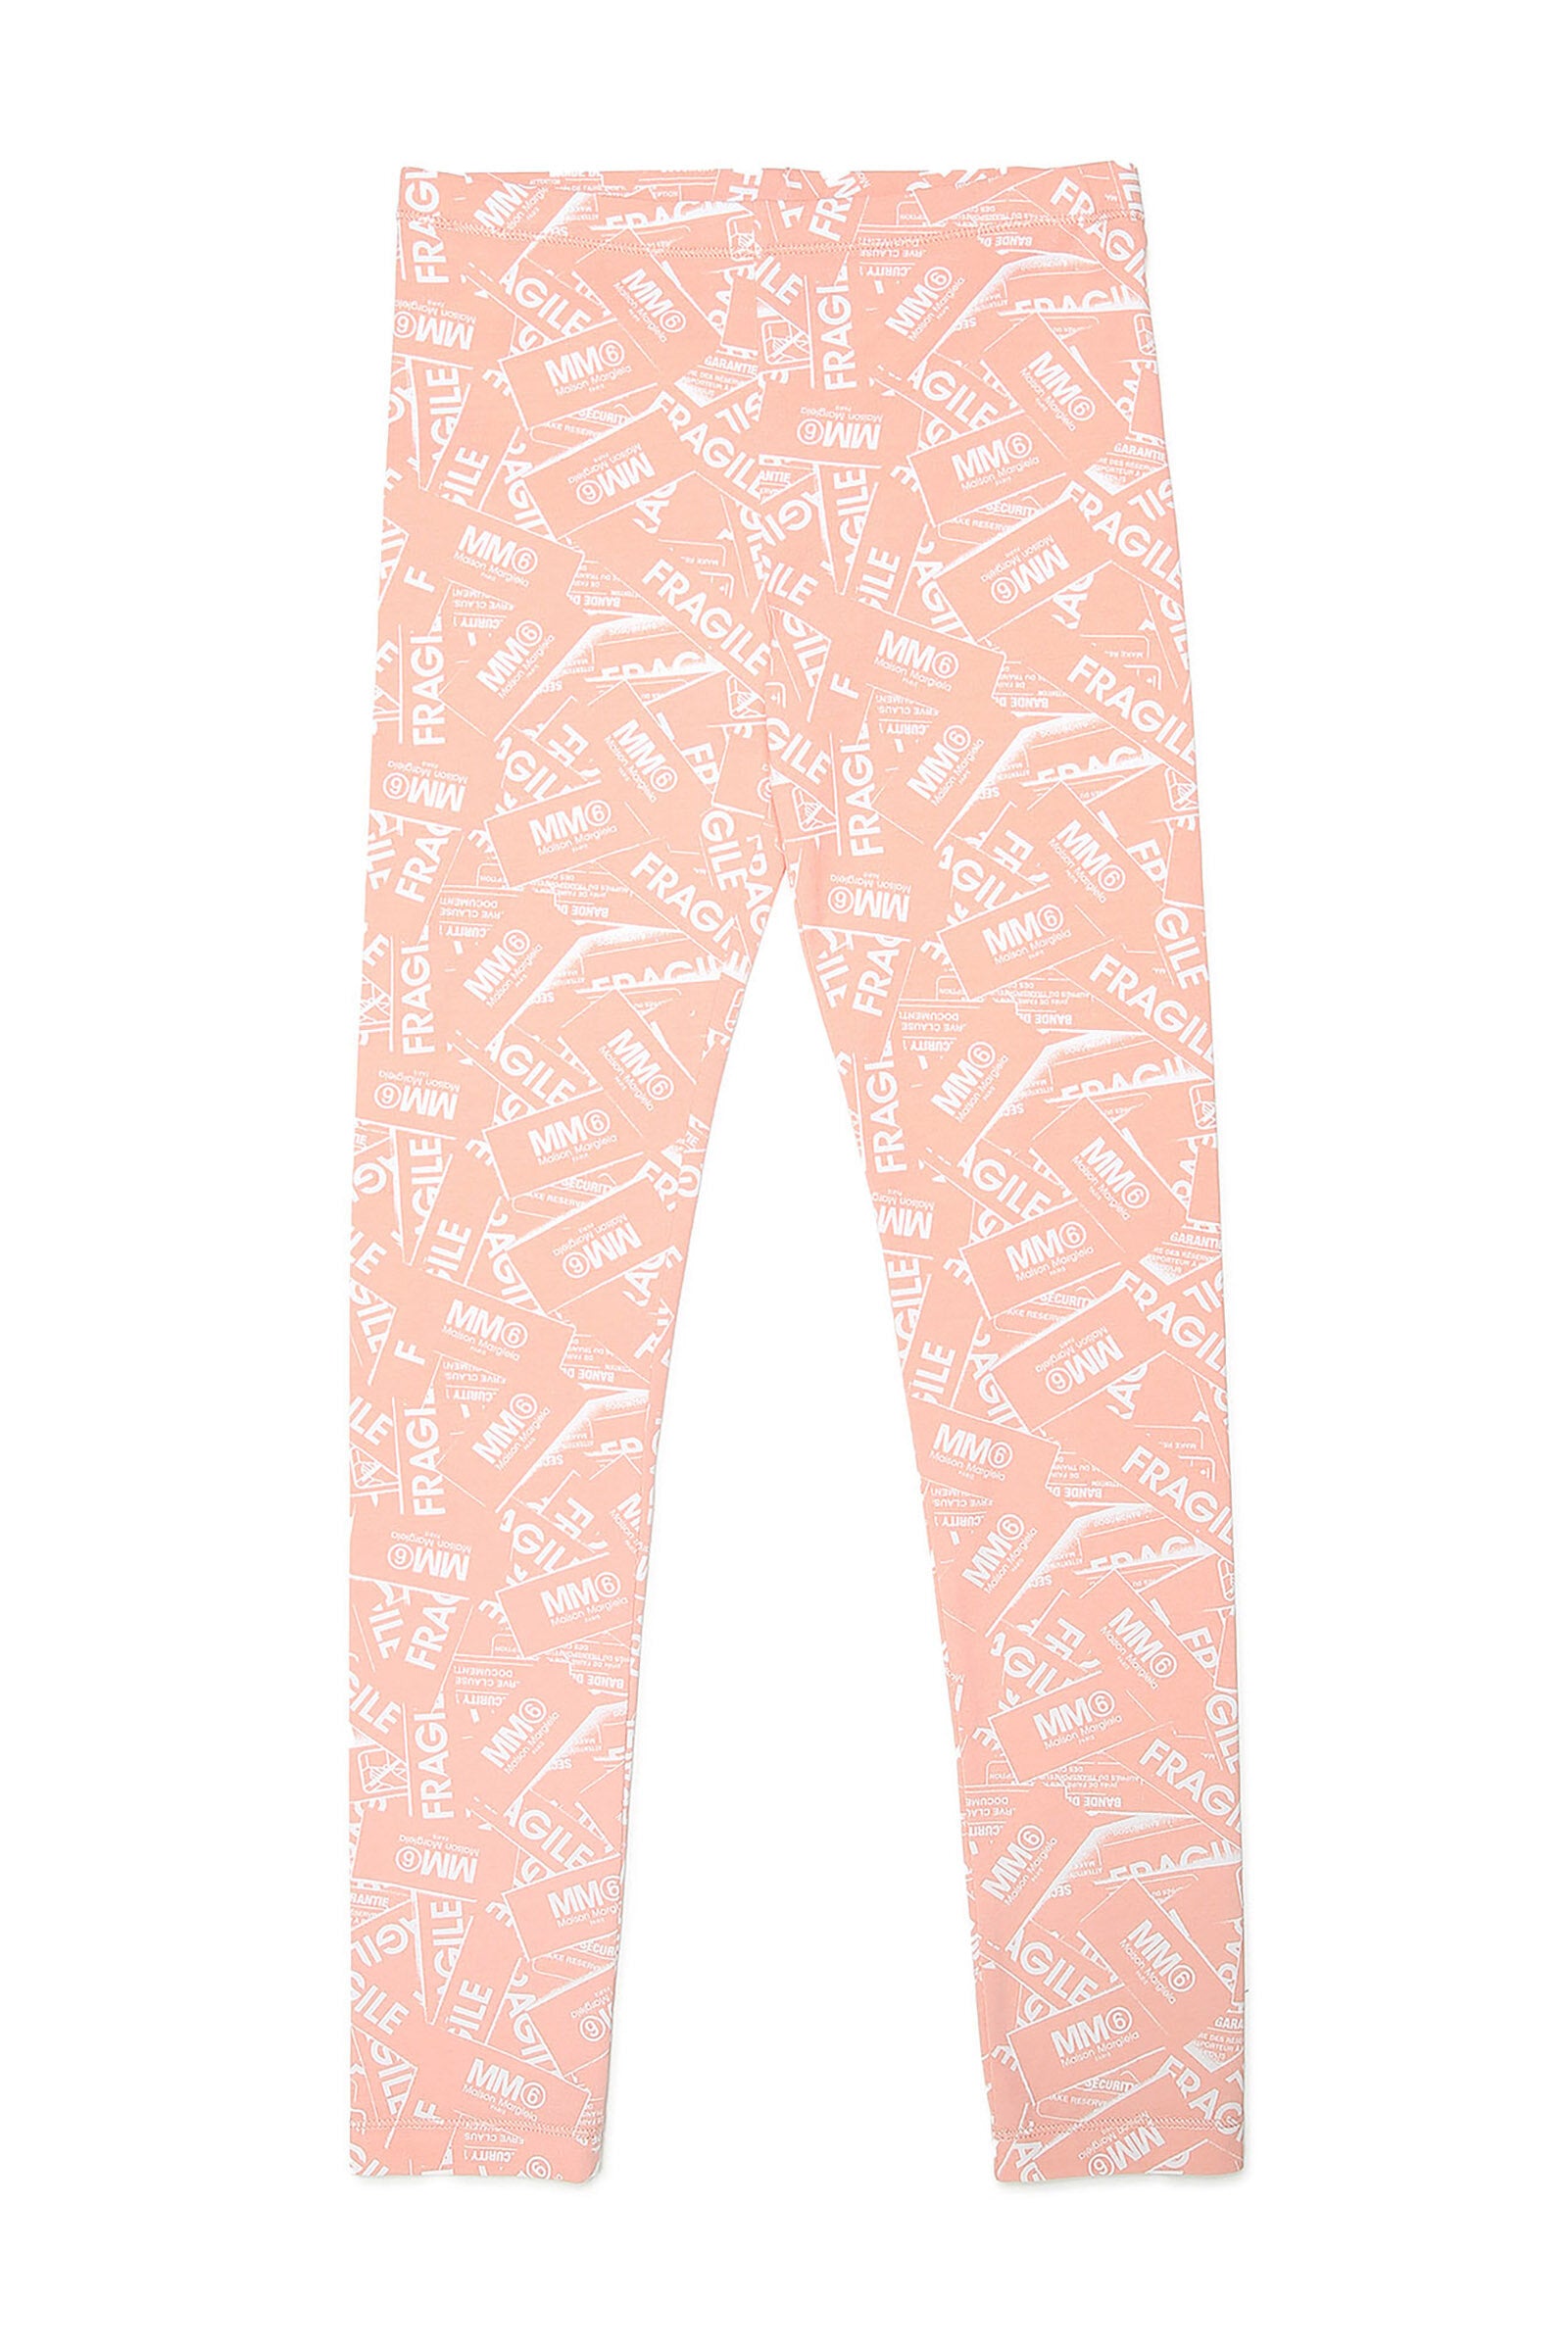 MM6 MAISON MARGIELA PINK LEGGINGS WITH ALL-OVER PRINT